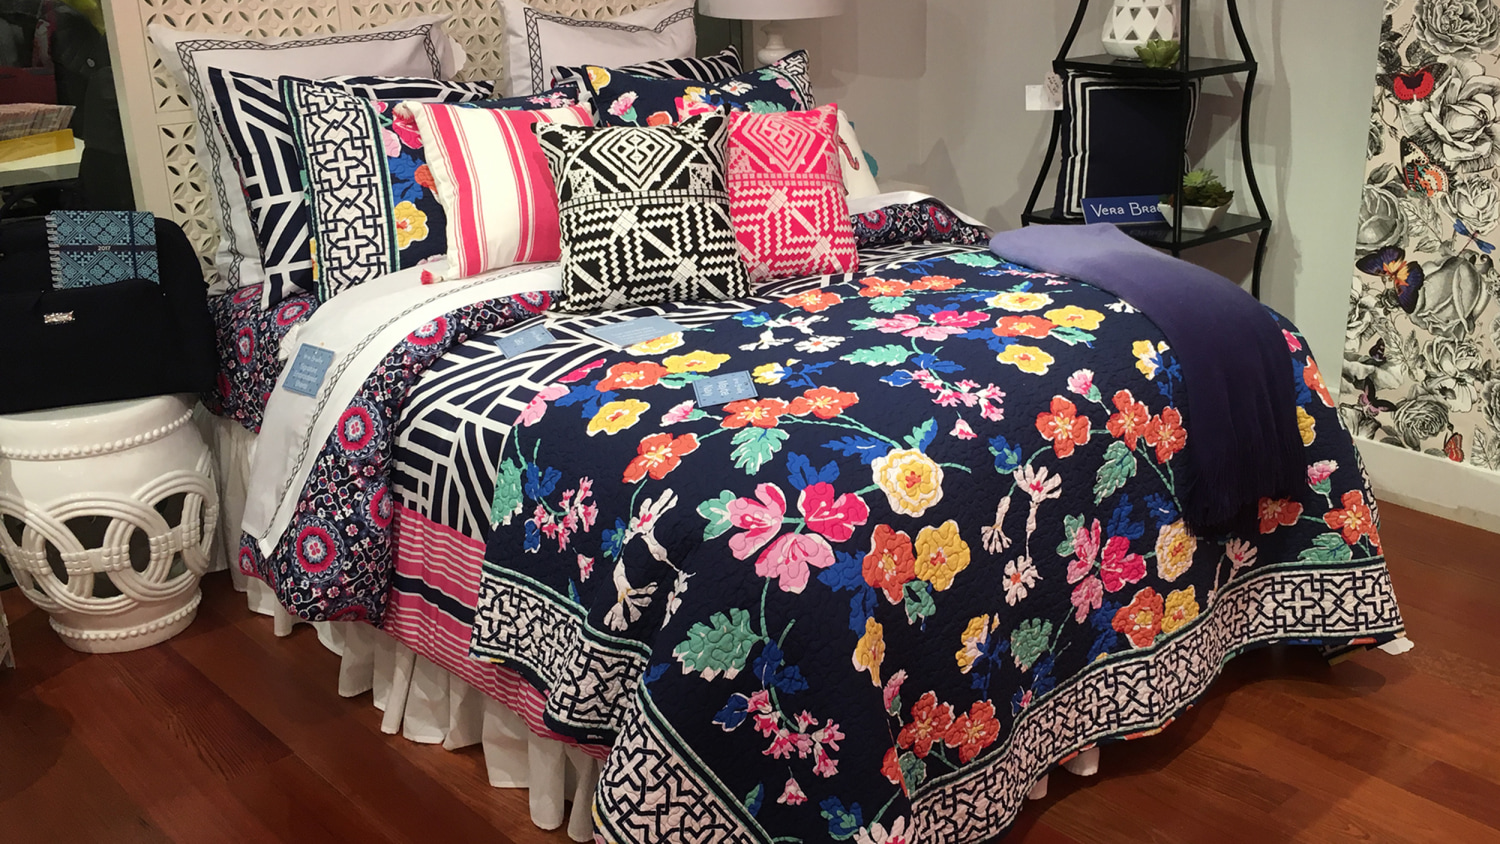 Vera Bradley's bedding collection launches